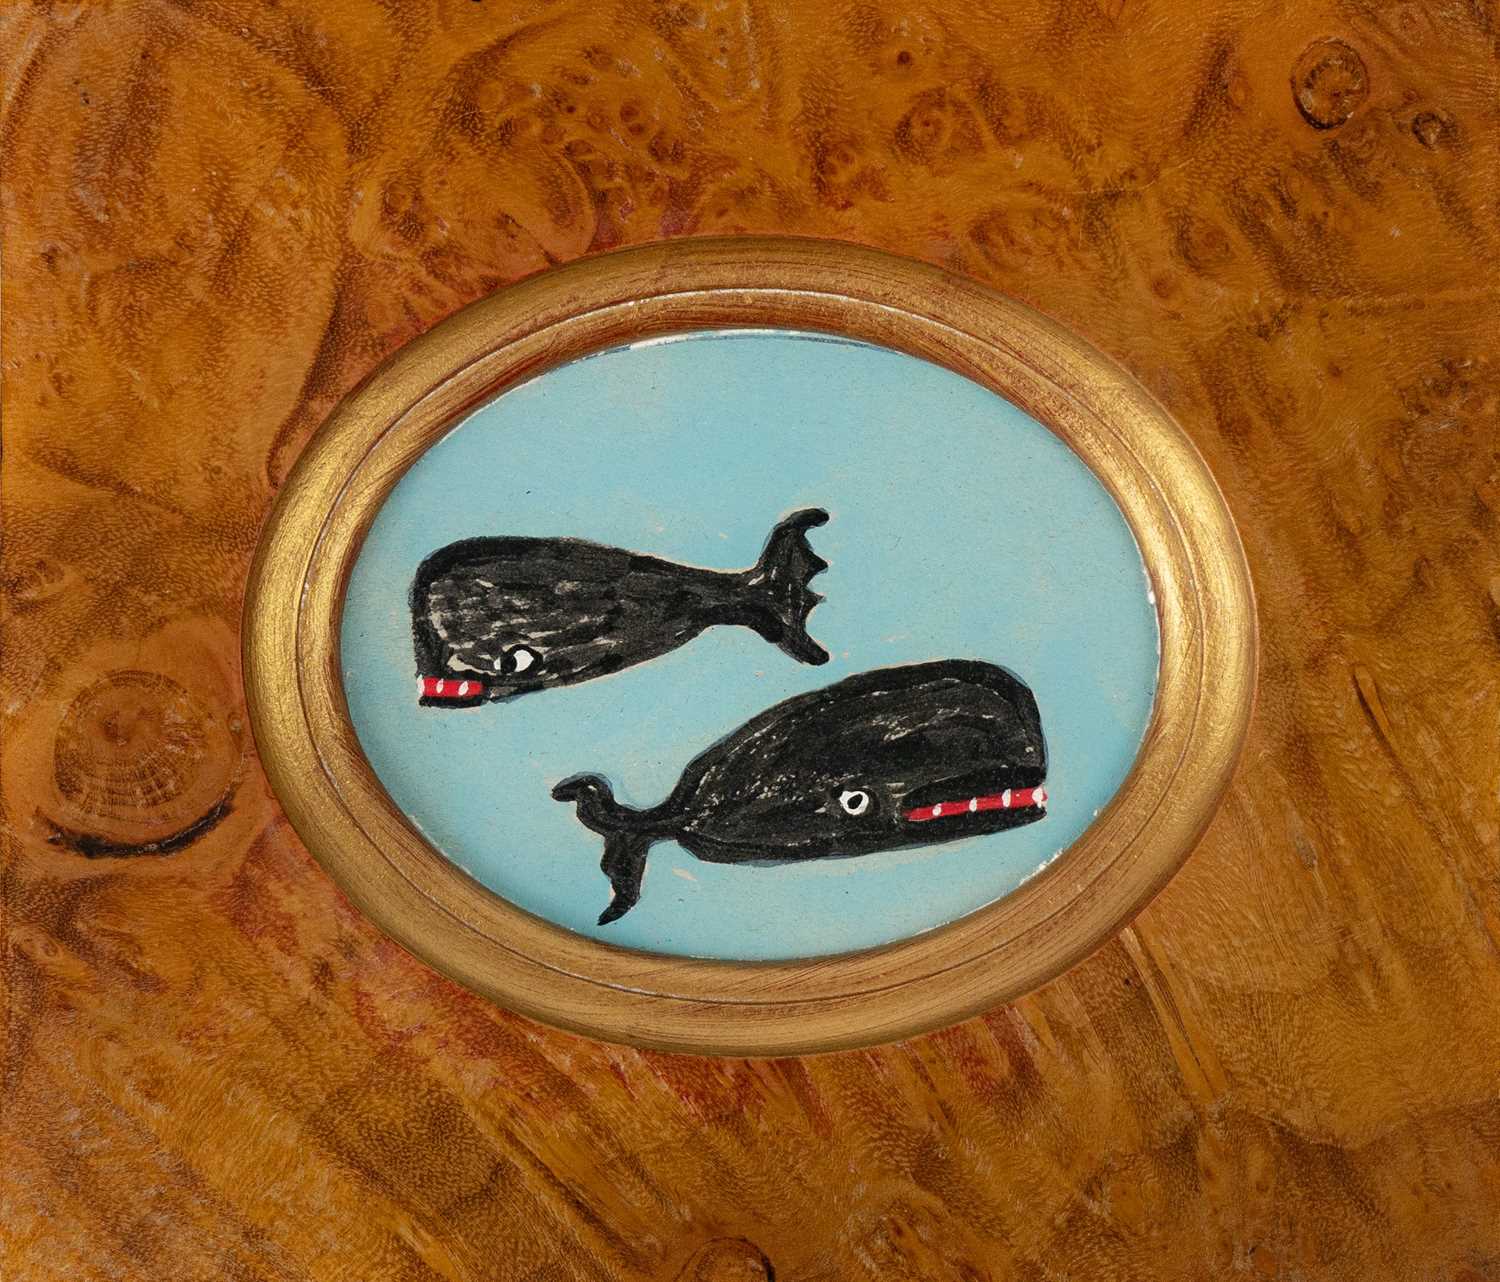 Stephen CAMPS aka Scamps (Cornish Naïve School, 1957) Two Whales Through The Porthole Window - Image 2 of 3